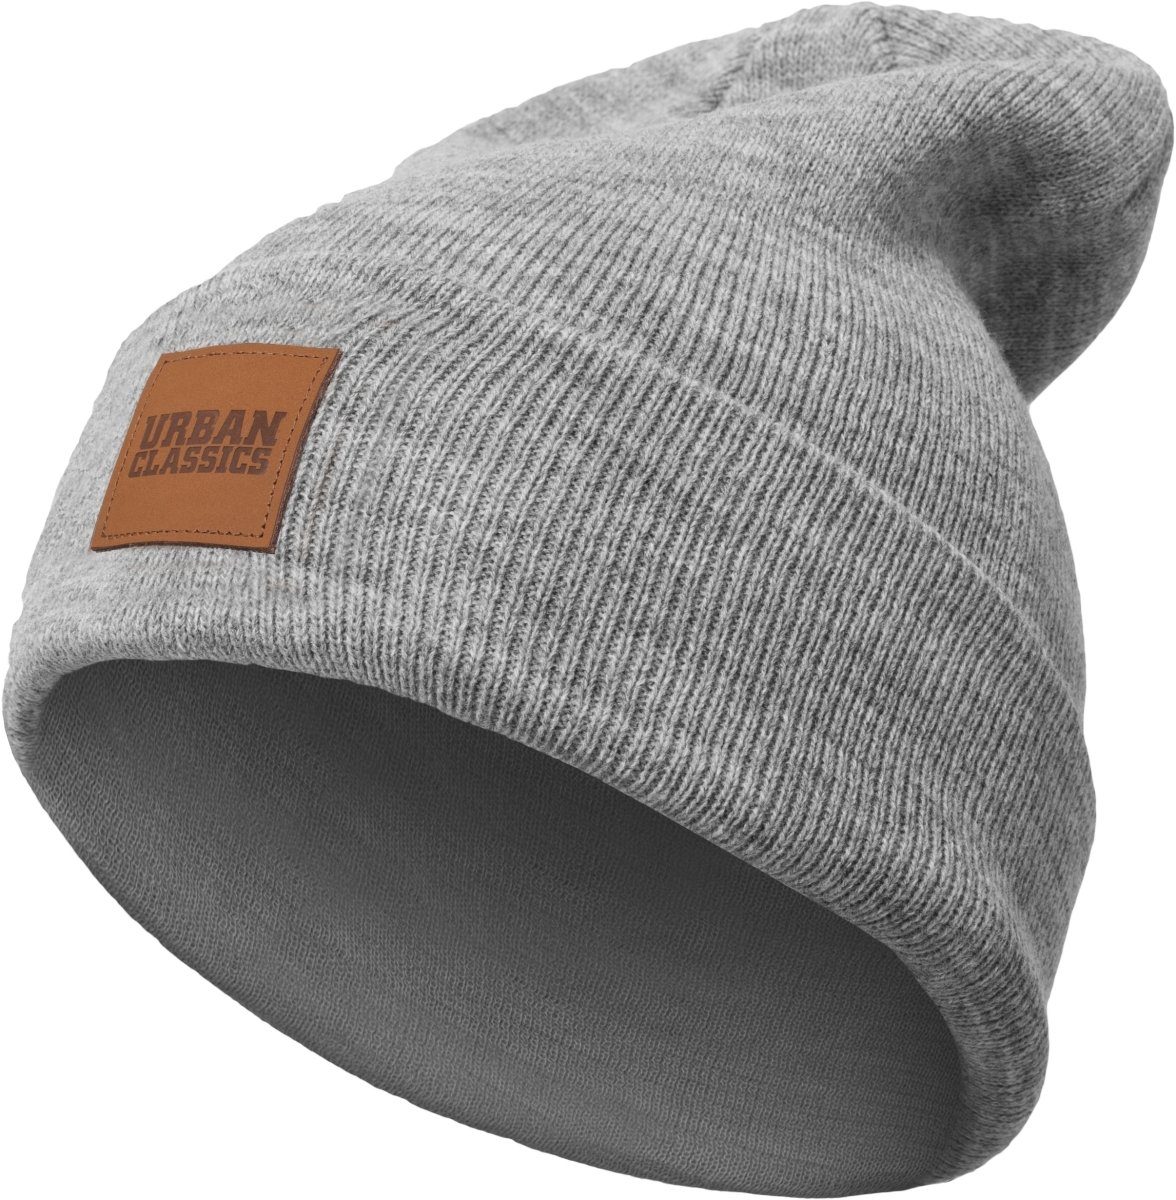 URBAN CLASSICS Beanie Unisex Synthetic Leatherpatch Long Beanie (1-St) grey | Beanies